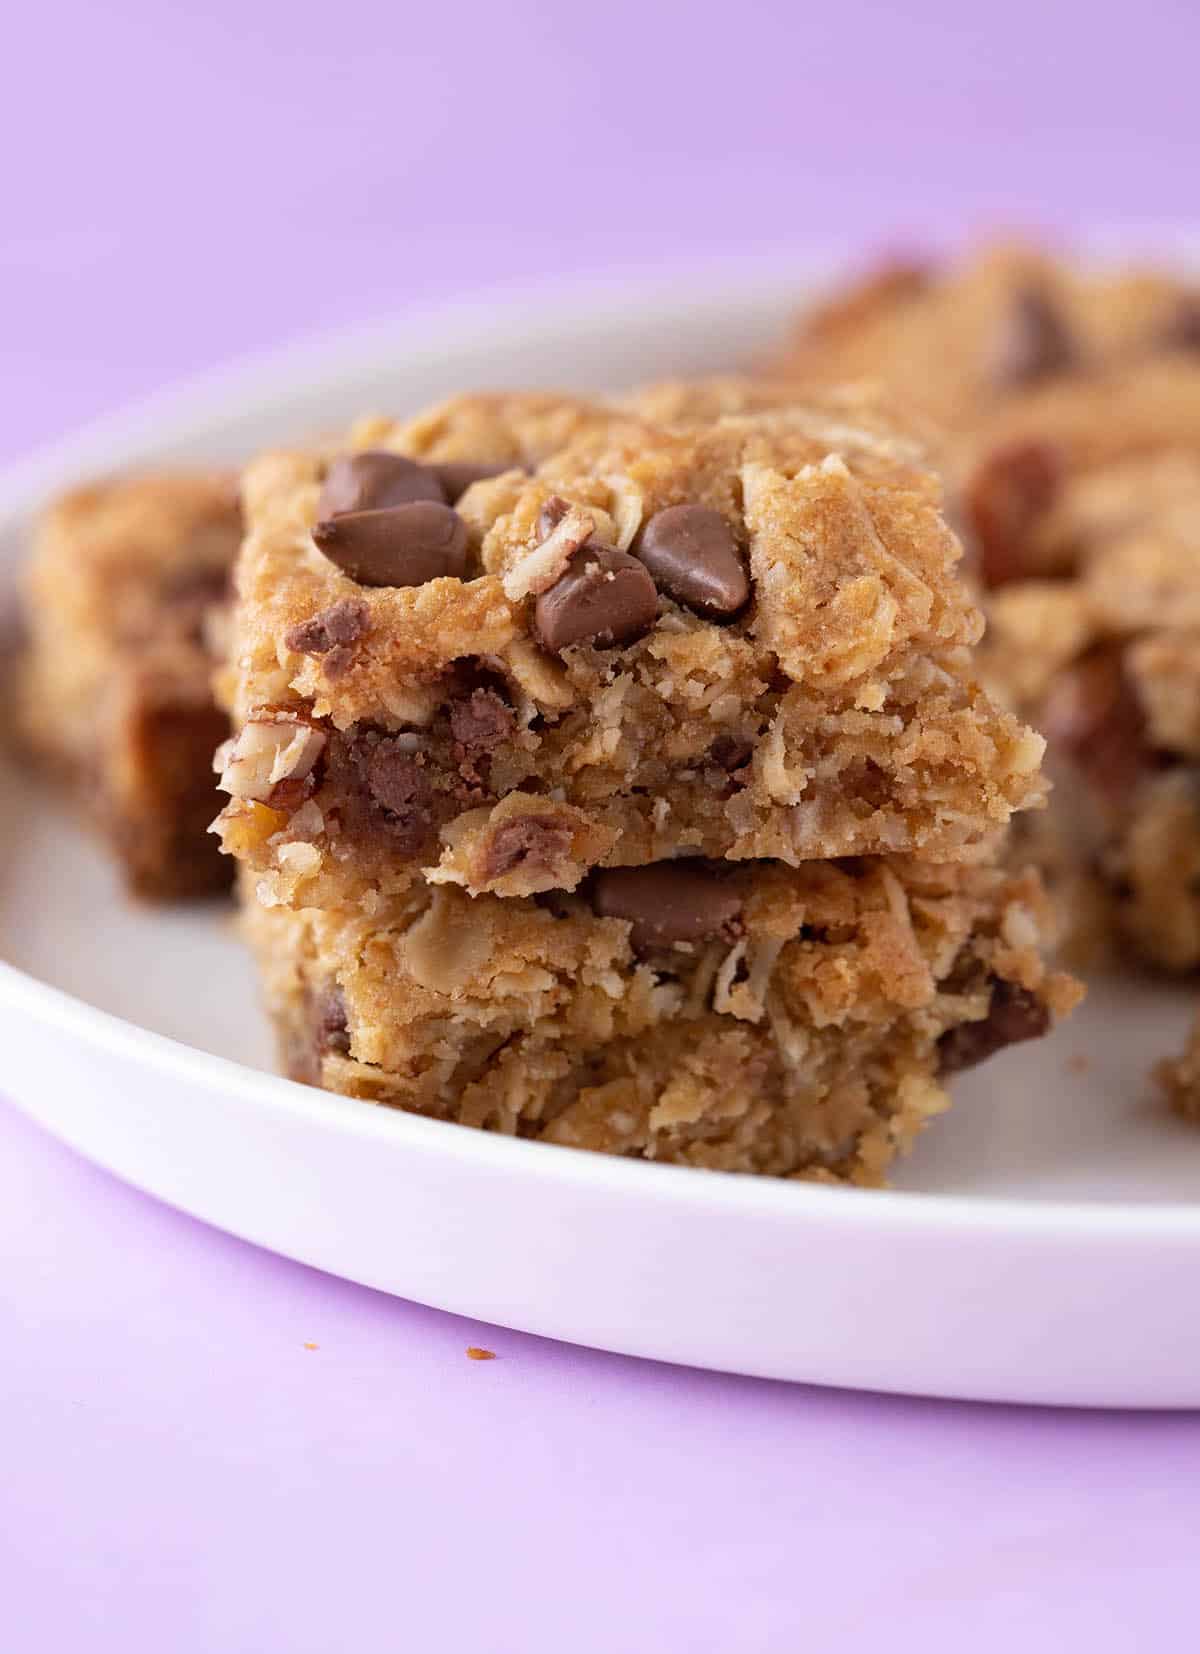 A plate filled with homemade Chewy Oat Slice.